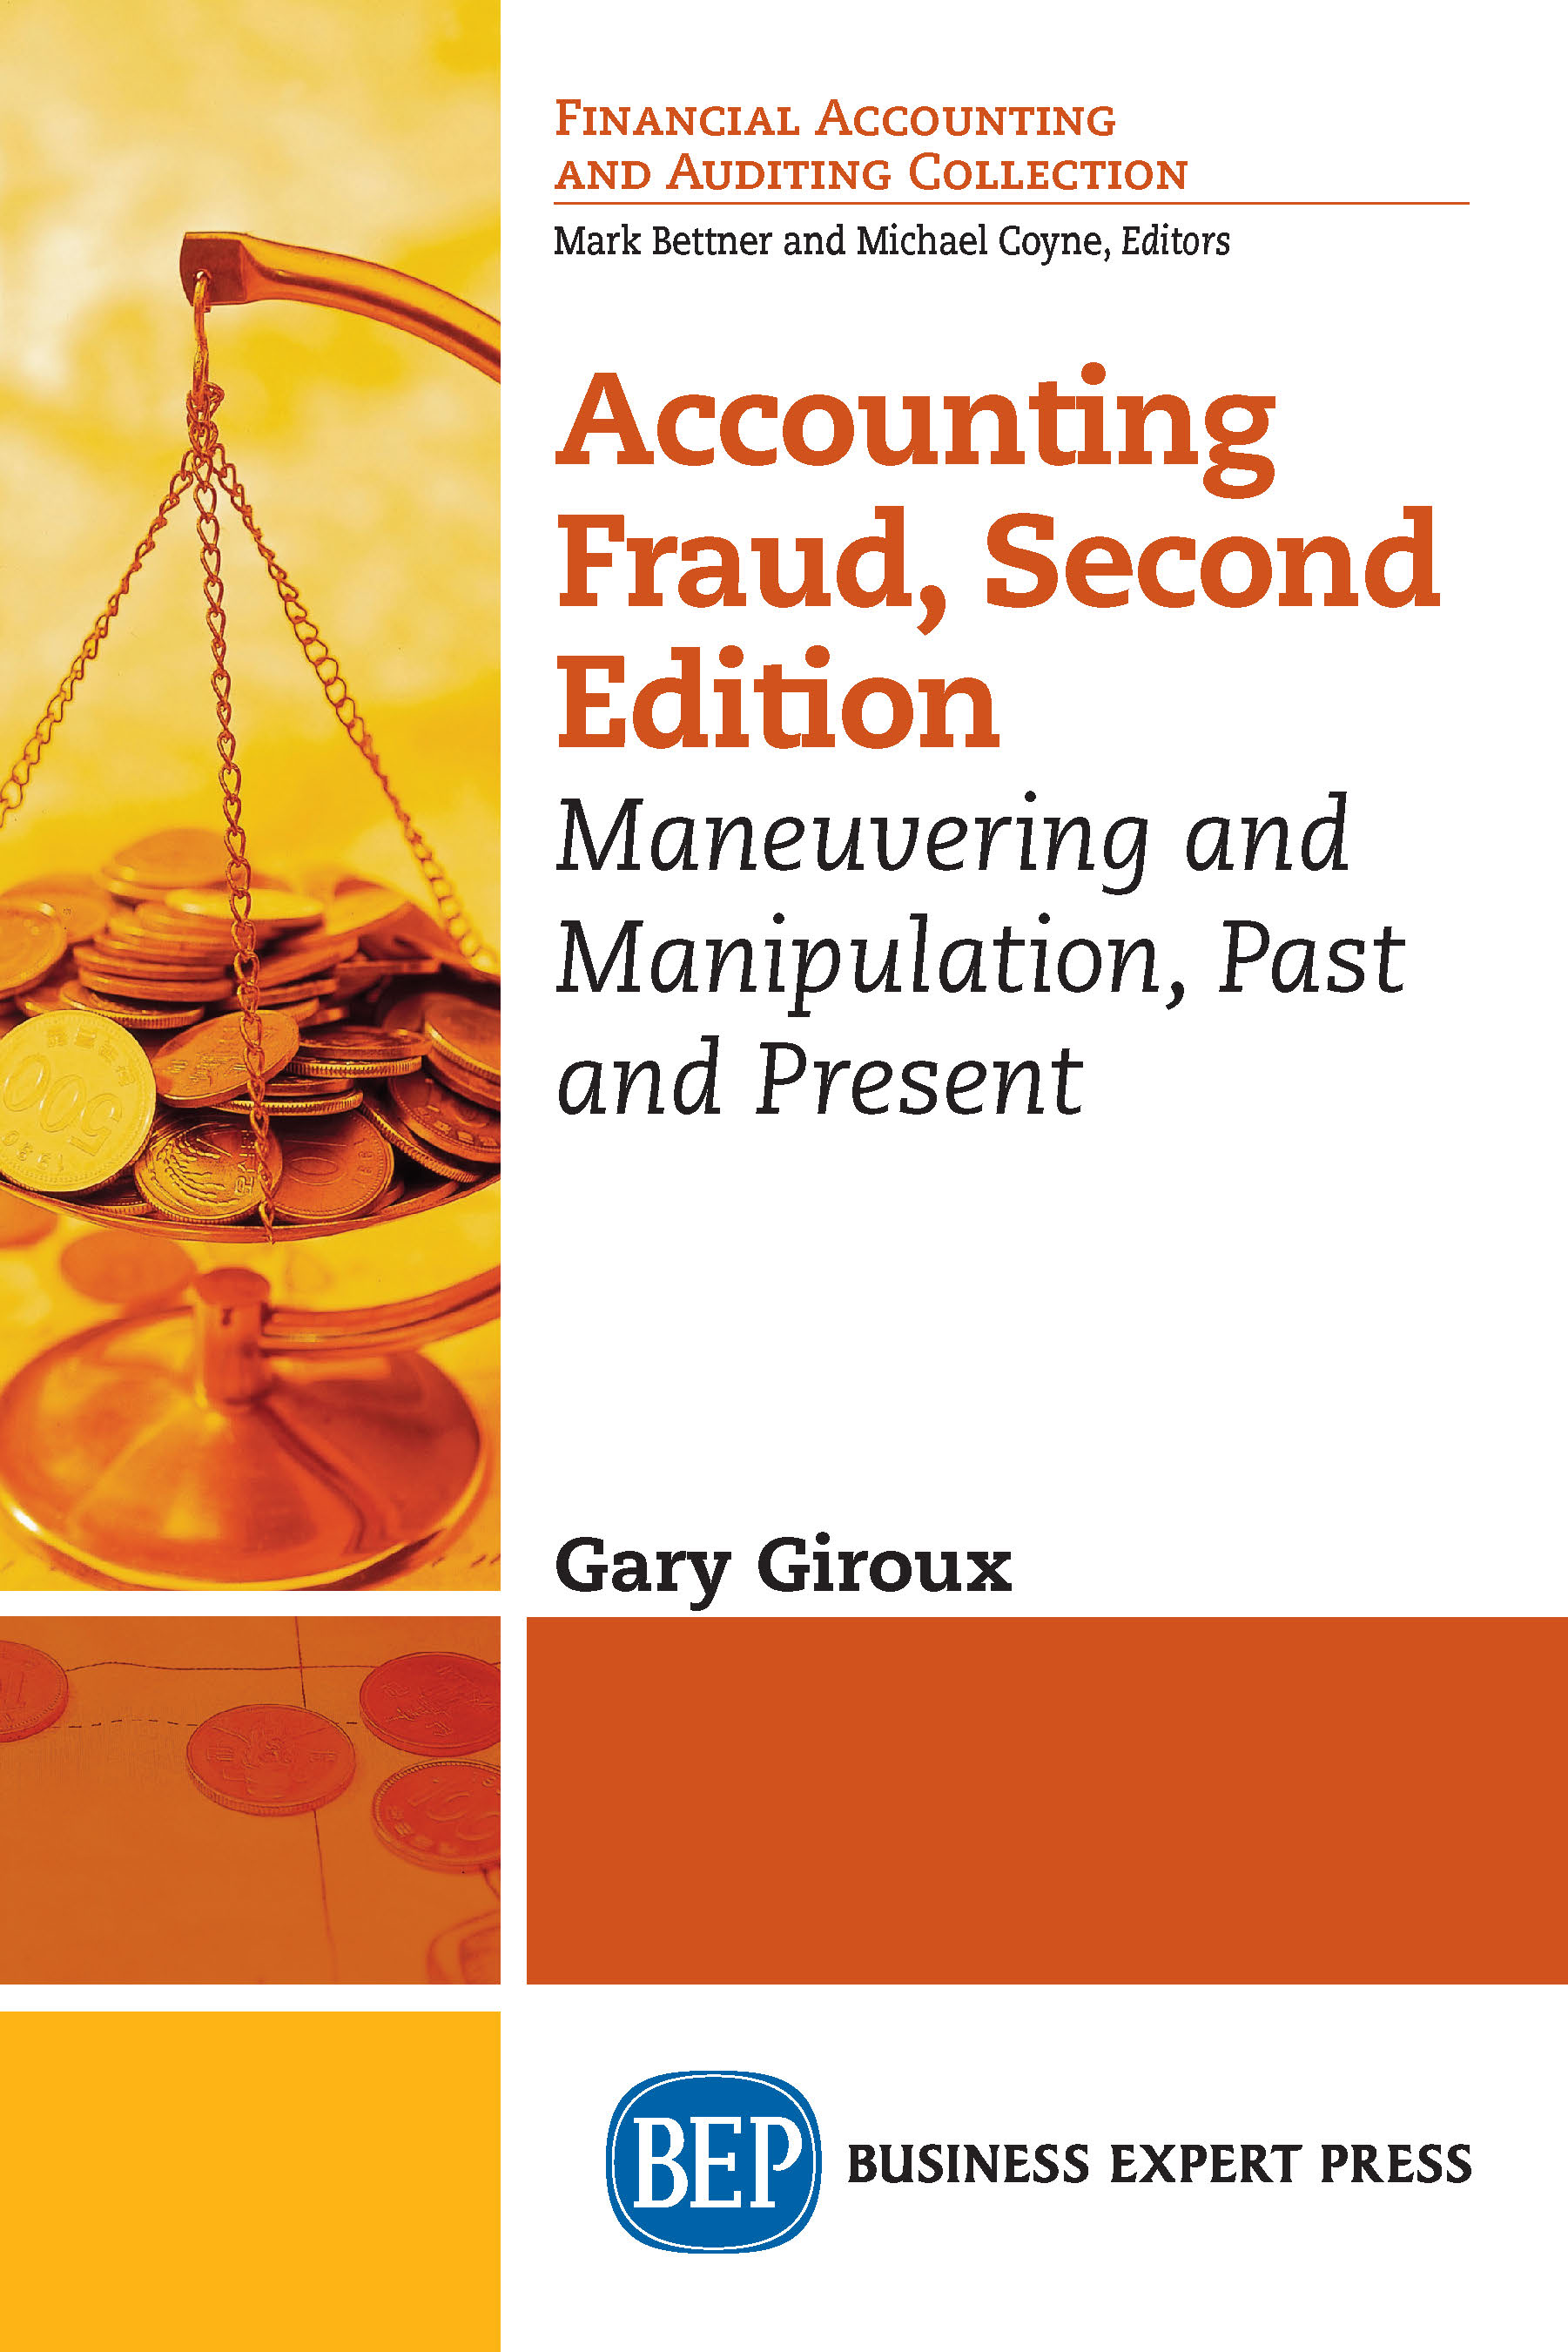 Accounting Fraud, Second Edition